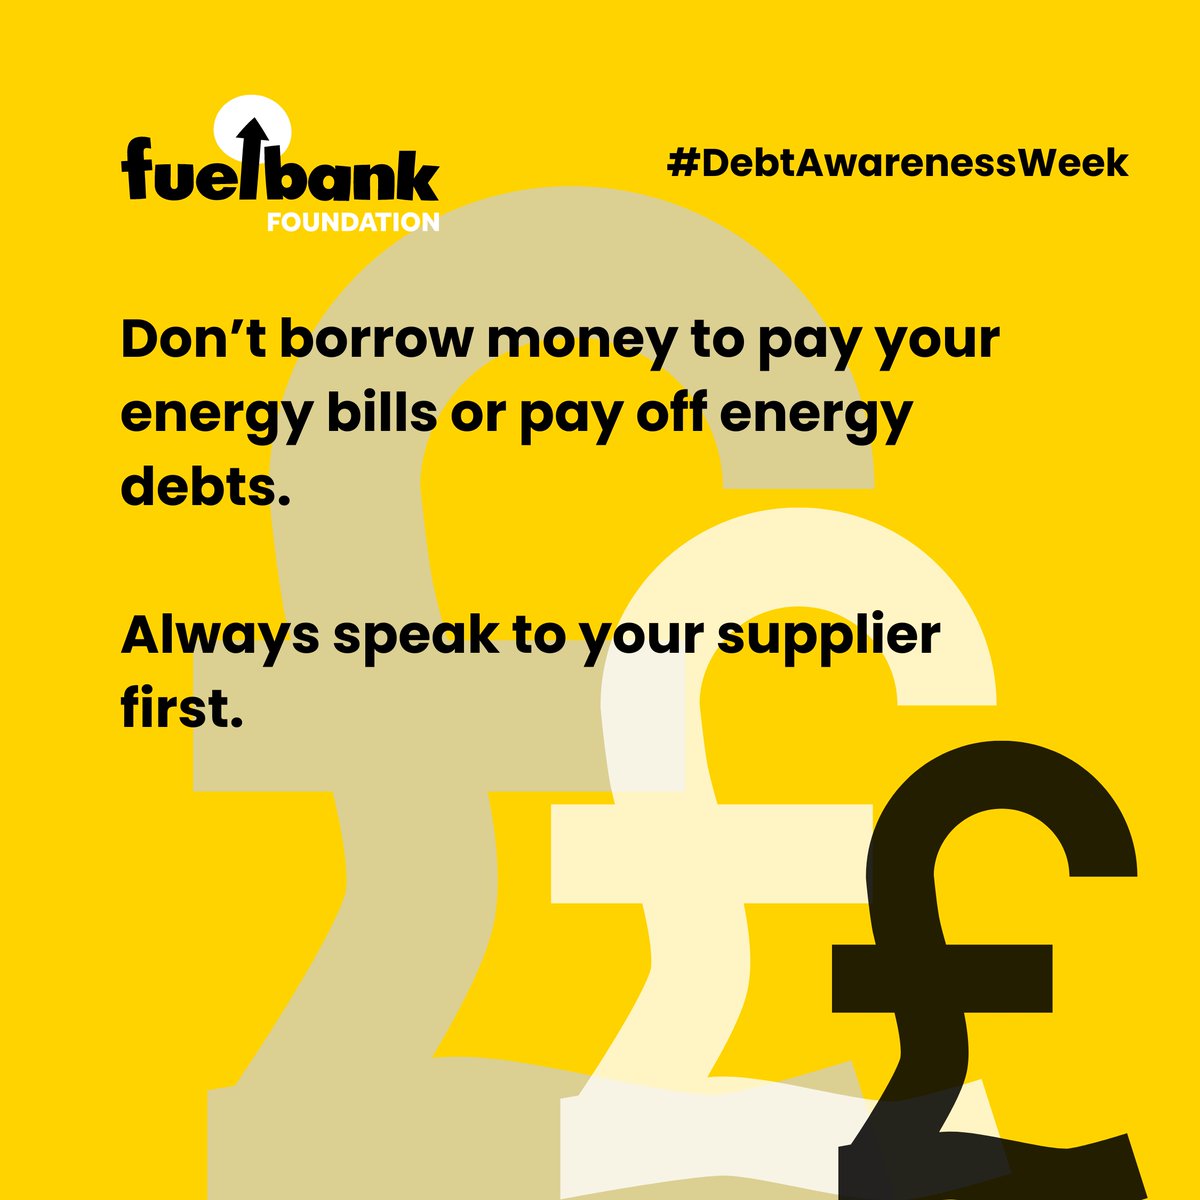 If the credit on your meter has run out or you can't afford to pay your energy bill, borrowing money isn't the answer - it just creates more debt. Speak to your energy supplier or debt advice service, who will always be able to help. #DebtAwarenessWeek #EnergyBills